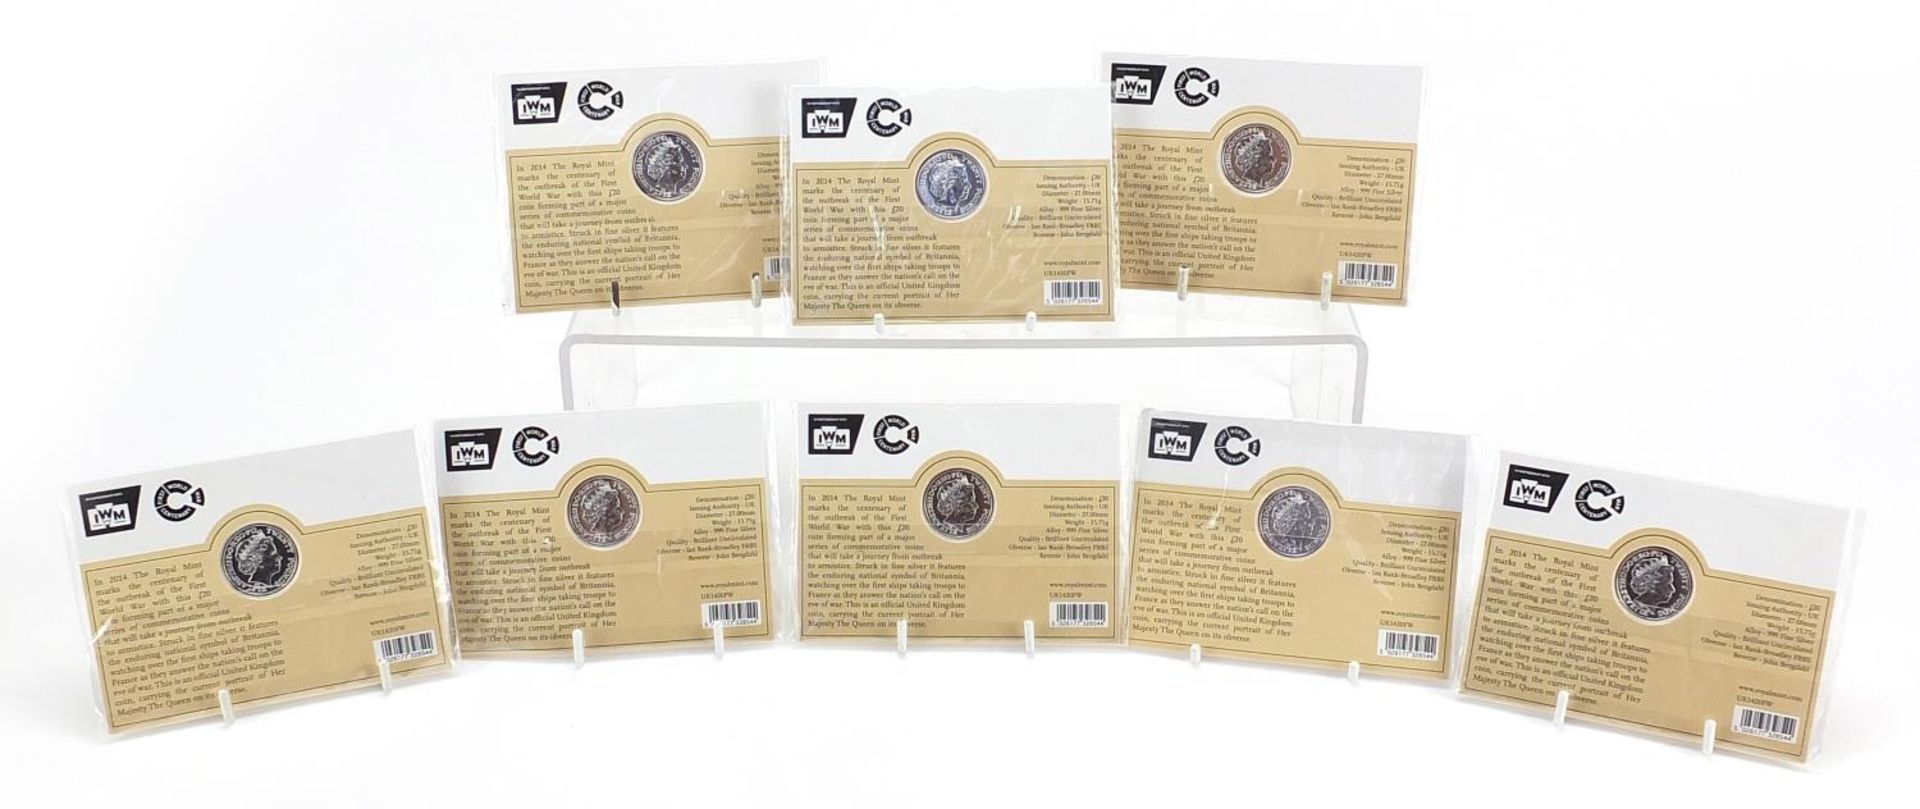 Eight sealed 2014 Outbreak twenty pound fine silver coins by The Royal Mint - Image 5 of 8